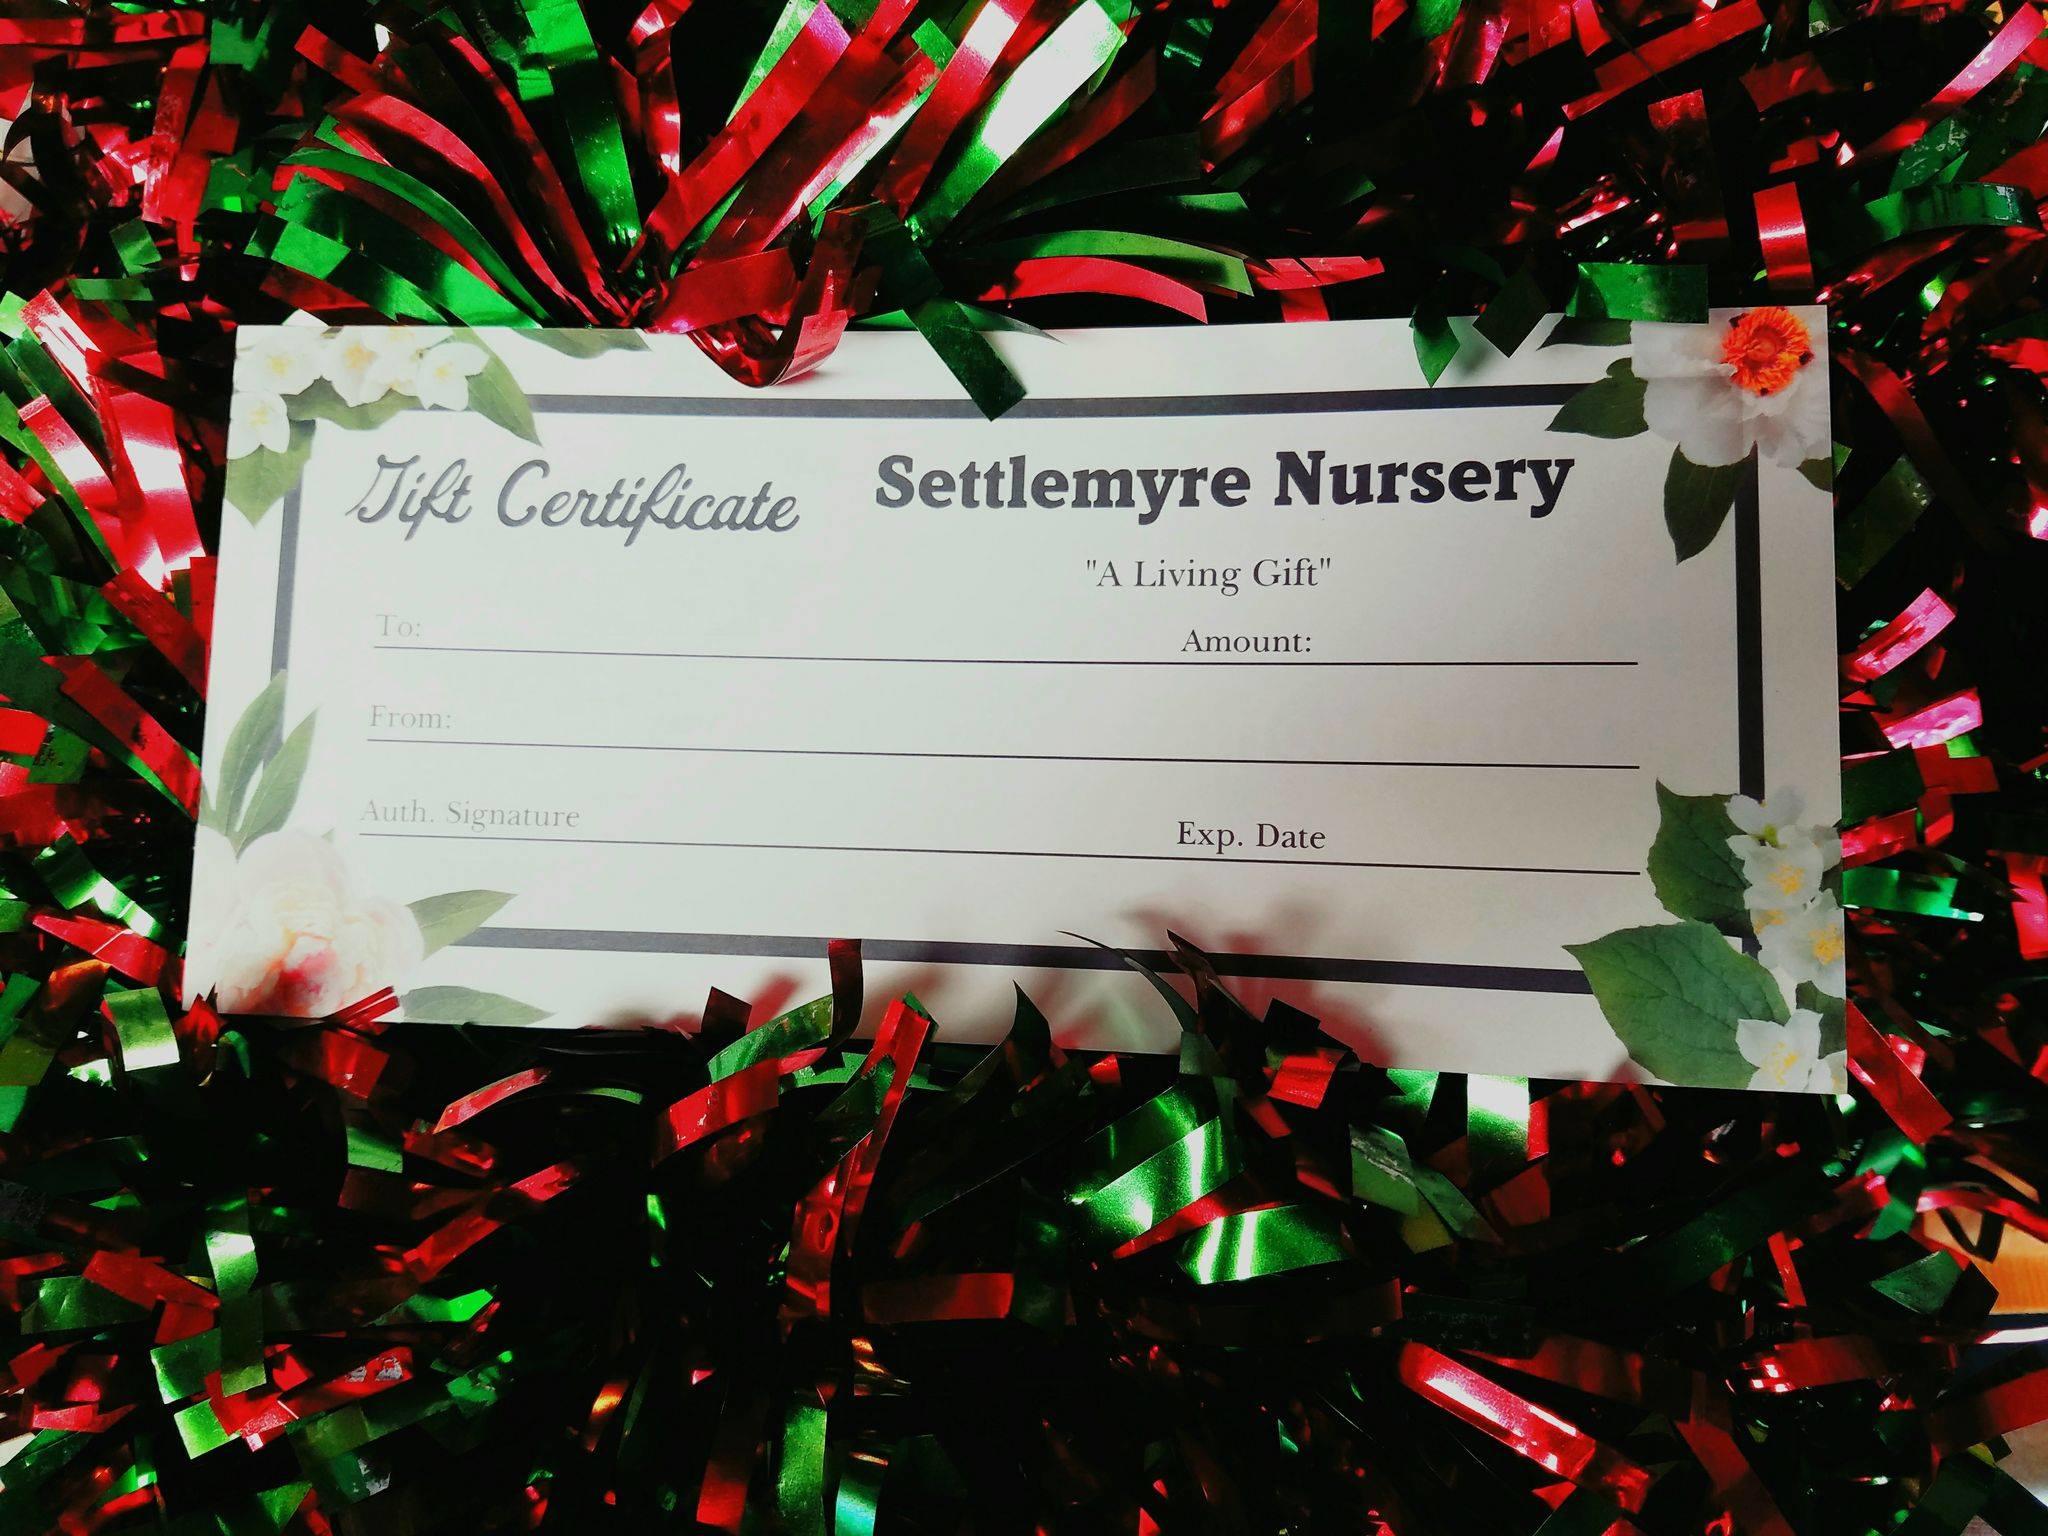 If you have someone who loves plants, has a new home or just needs landscaping work done grab a Settlemyre Nursery Gift Certificate. Great for Christmas, Wedding, Birthday, Mother's Day, Father's Day, Housewarming Gift or Anniversary!